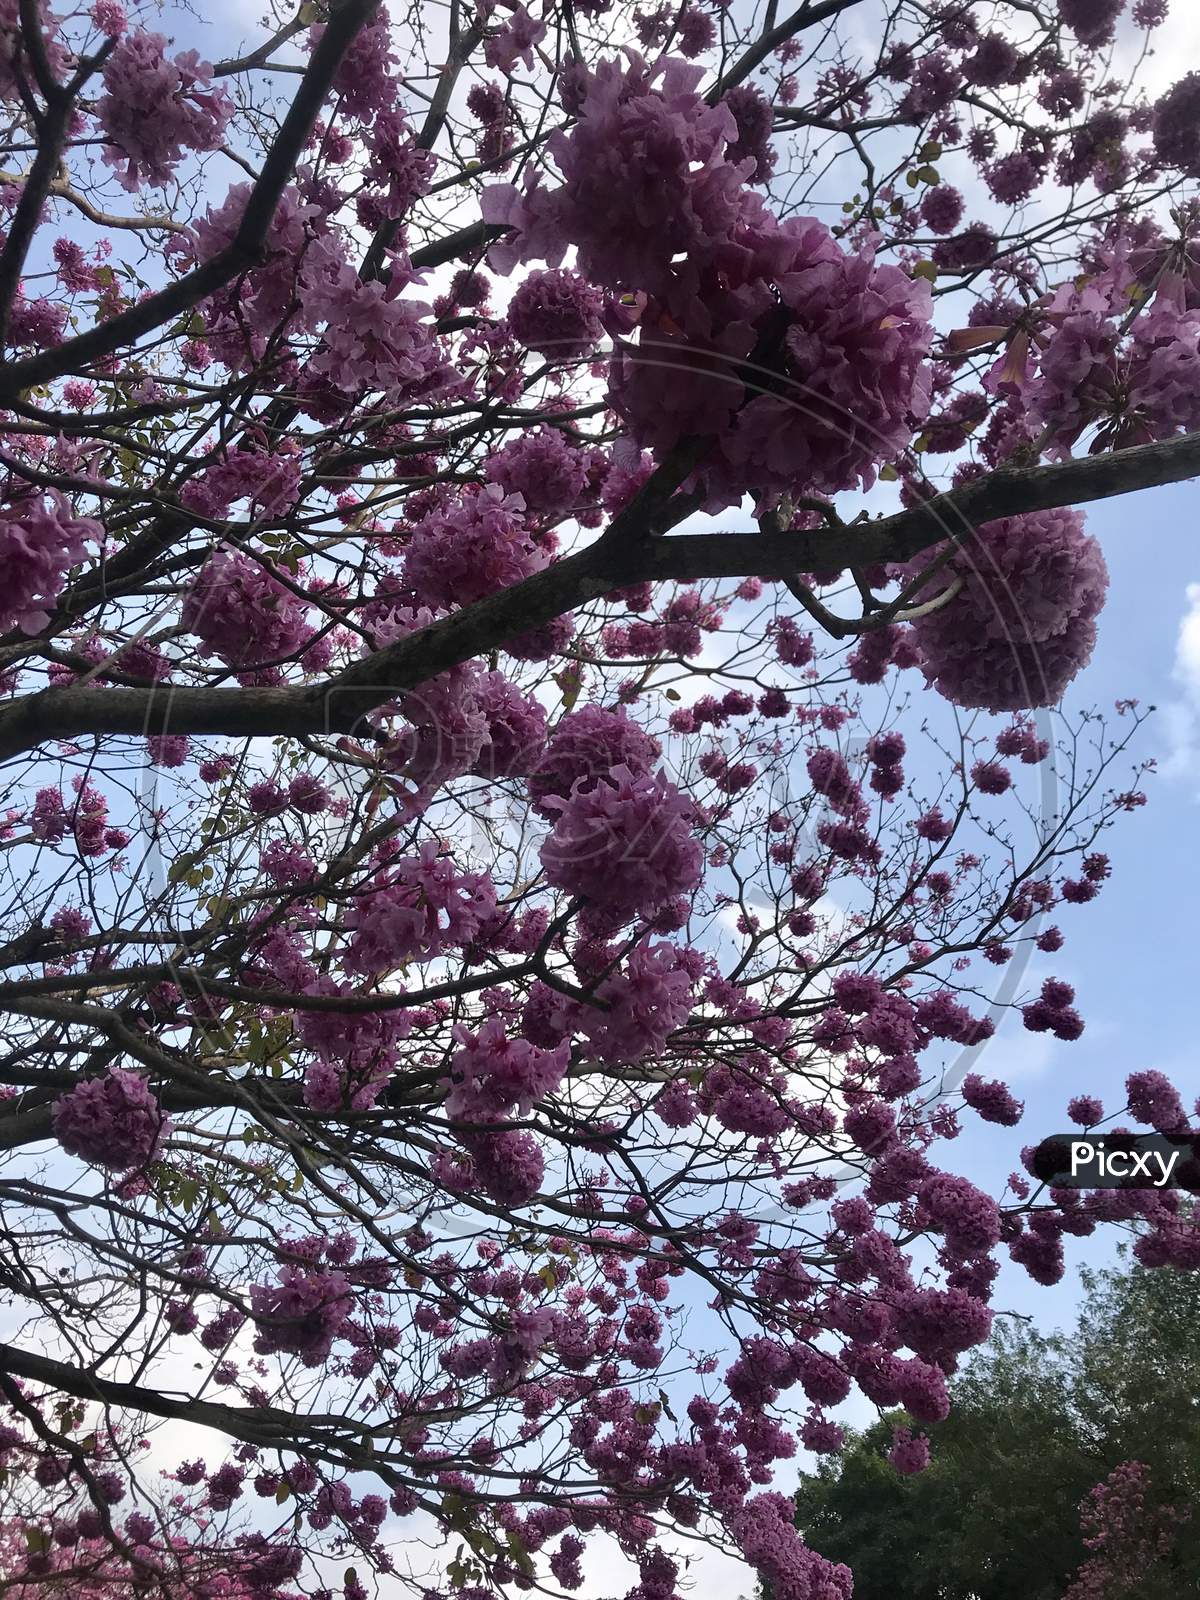 Canopy of Tree With Flowers Over Bright Sky